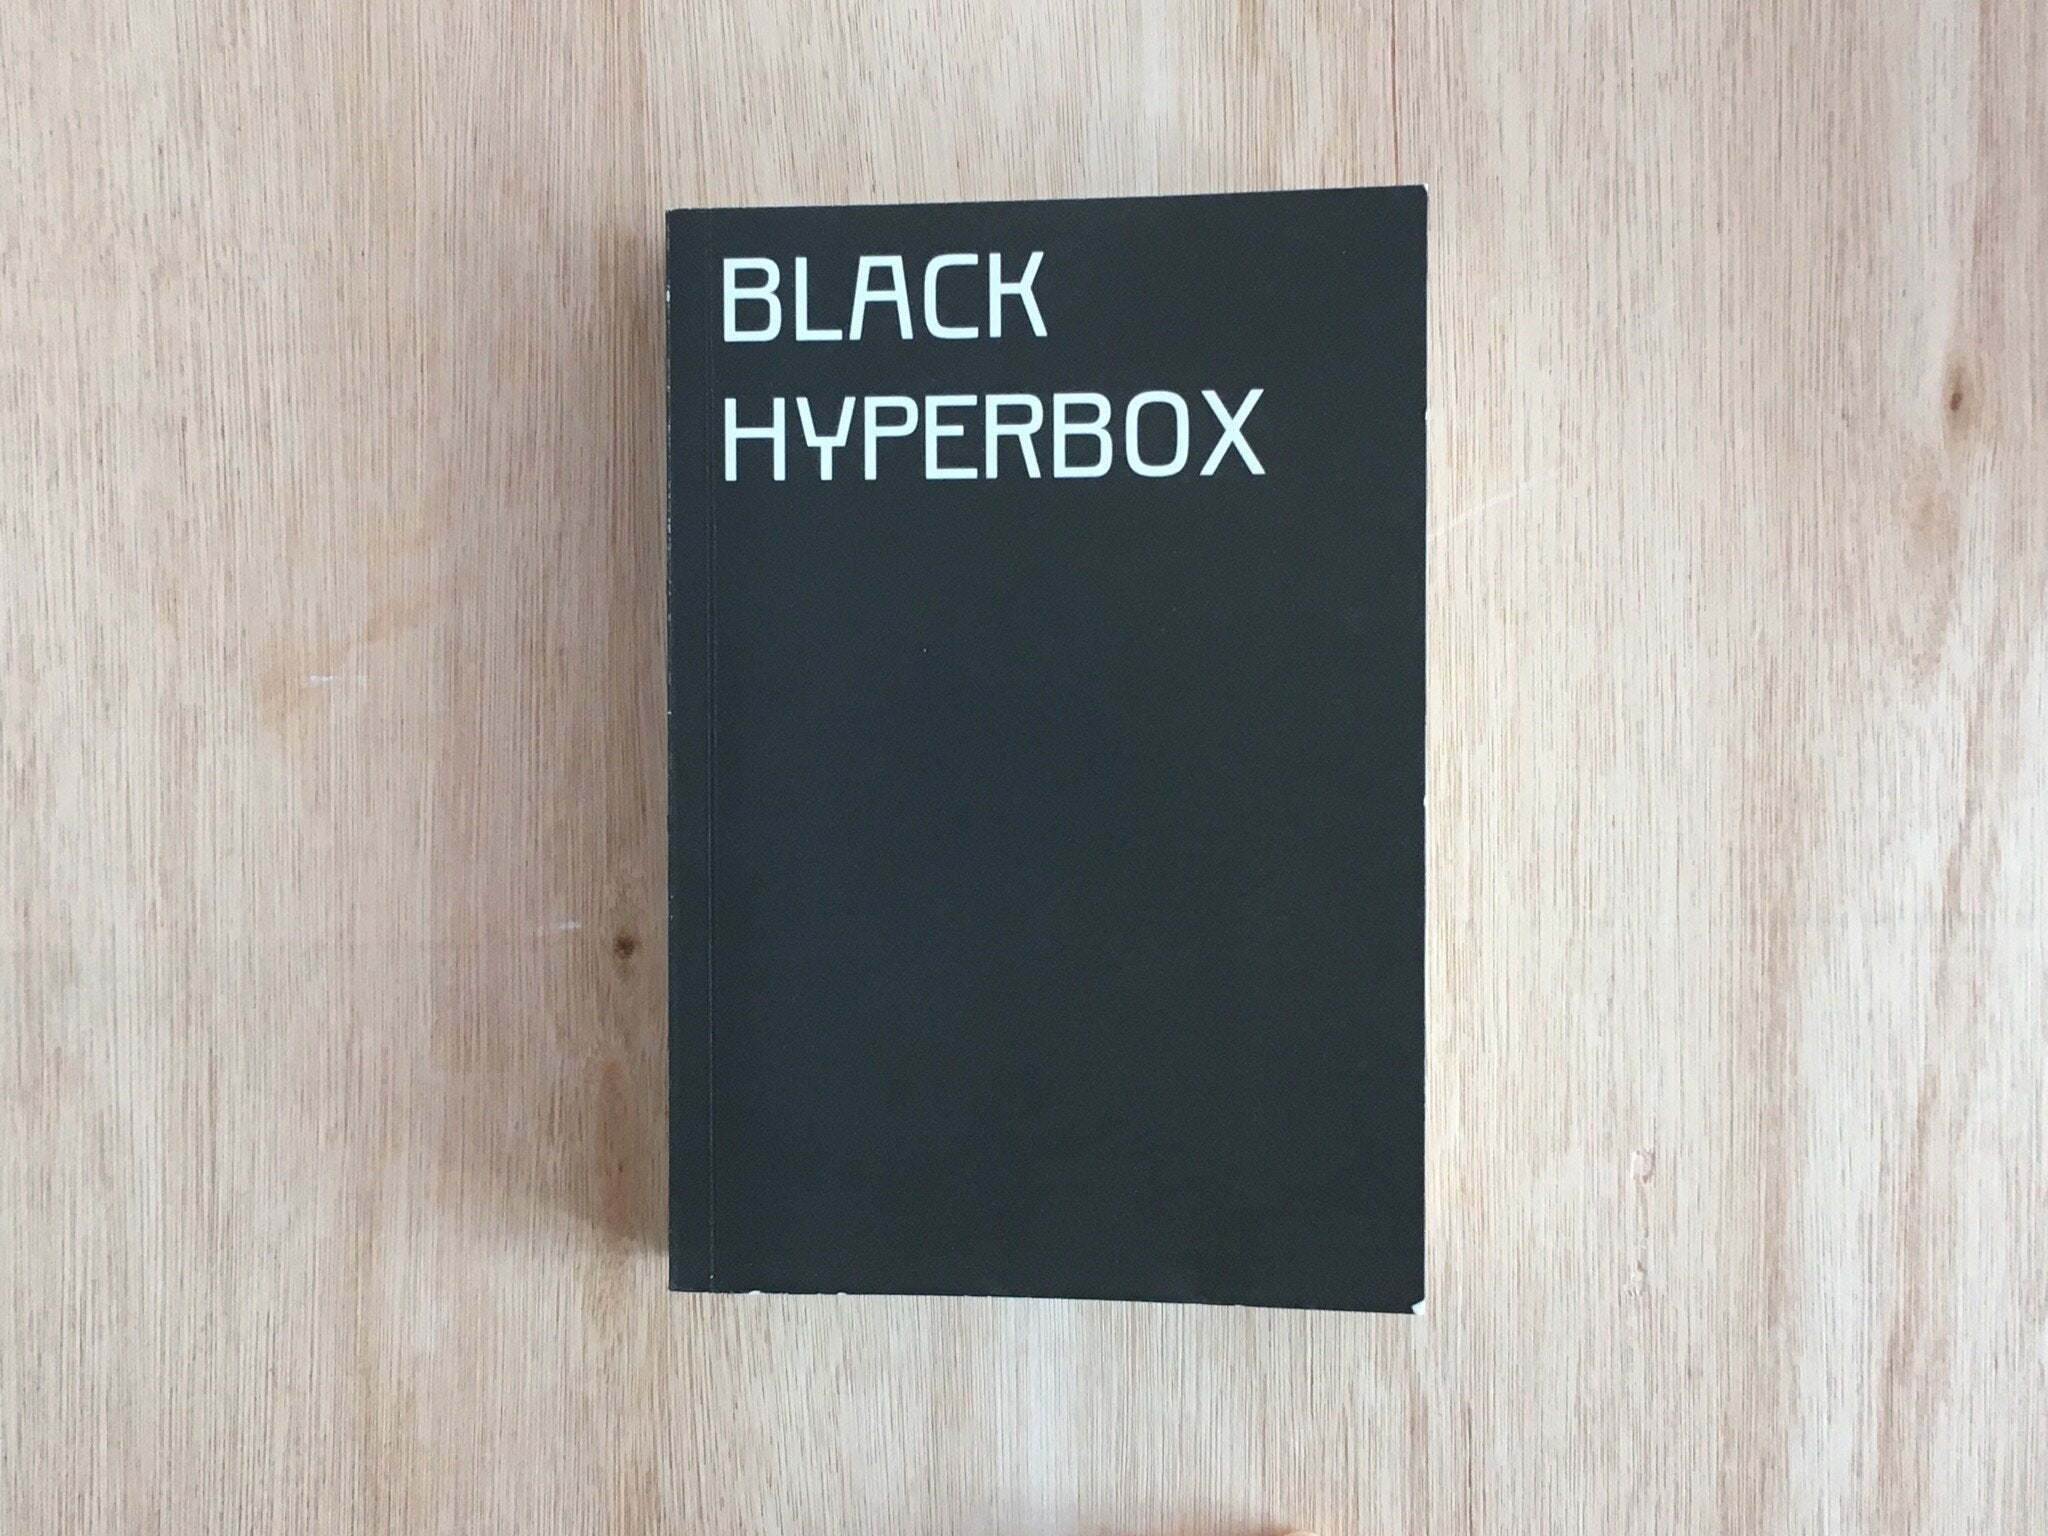 BLACK HYPERBOX by Various Artists